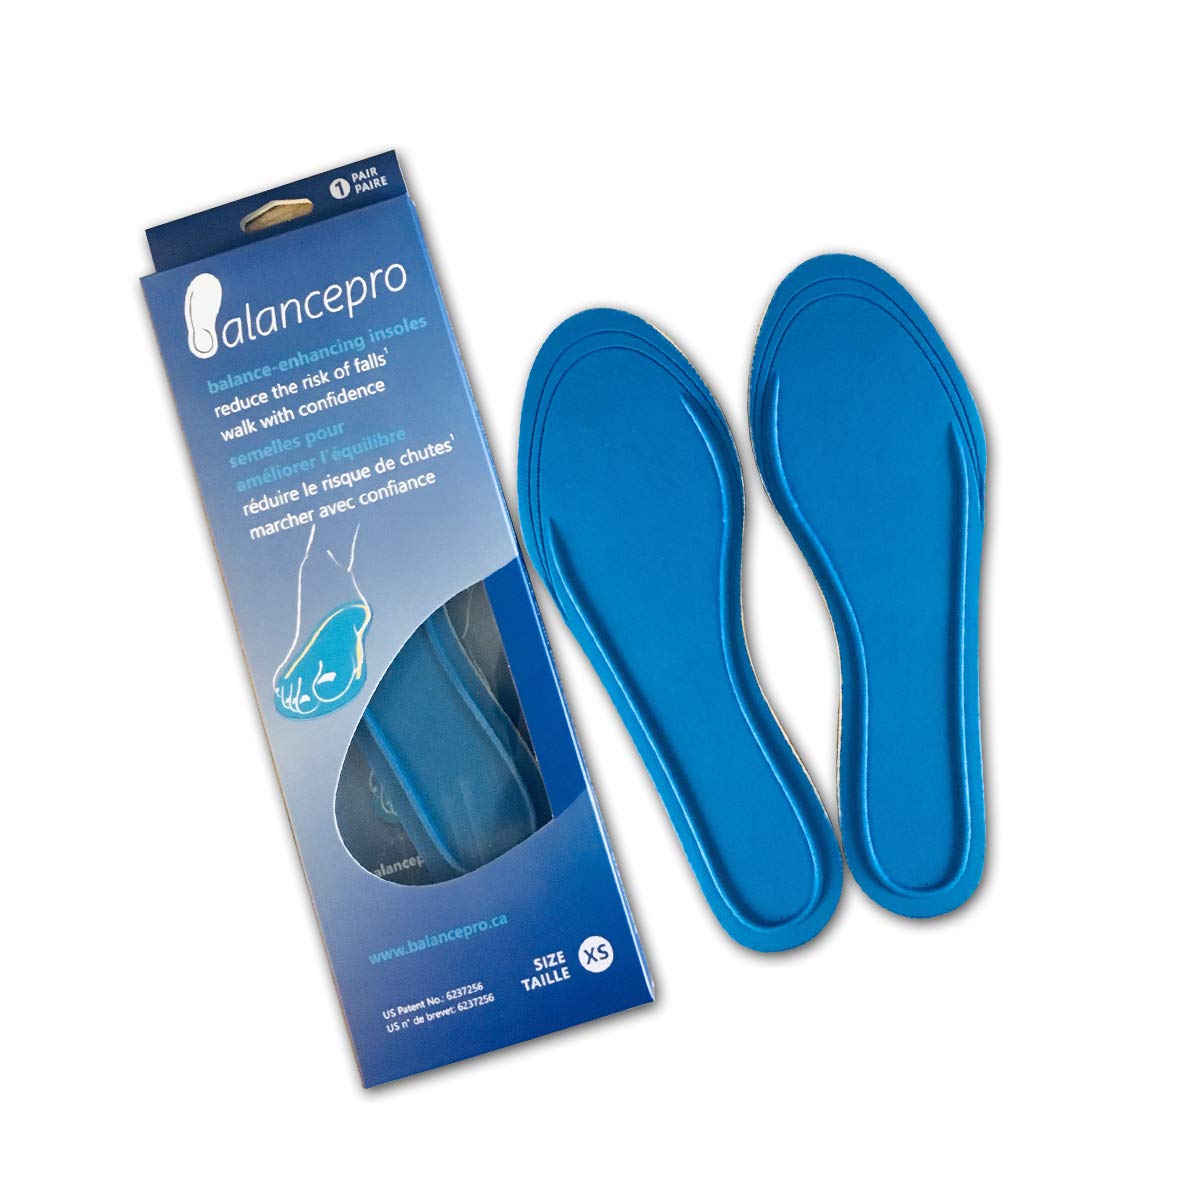 BalancePro Balance Enhancing Shoe Inserts for Men Patented Insoles for Fall  Prevention Ideal for Elderly Parkinson s Everyday Comfort - Size Medium  (8.5 9 10)